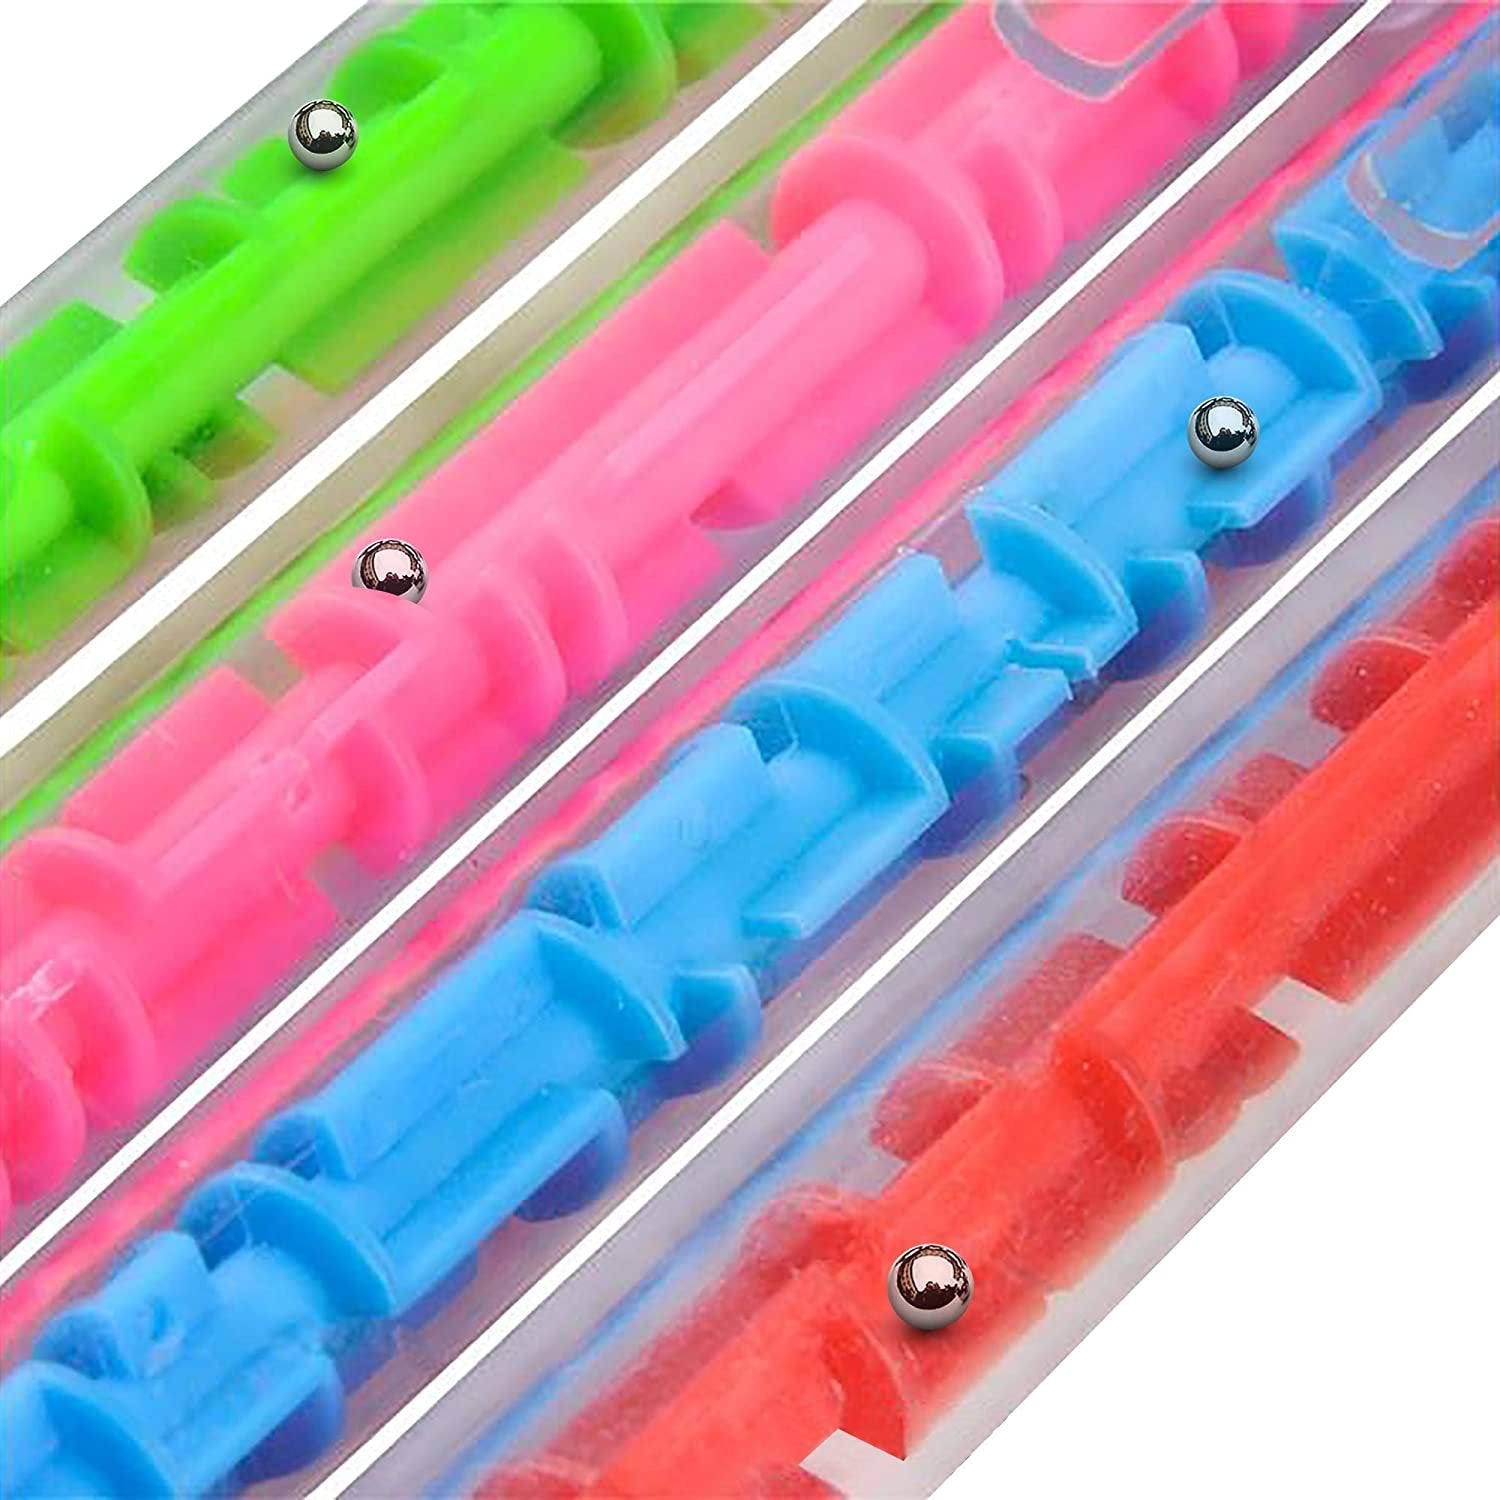 Gamie Maze Puzzle Novelty Pens for Kids and Adults - Pack of 12 - Pens with Built-in Ball Maze - Fidget Toy for Stress Relief - School and Office Stationery Supplies, Birthday Party Favors